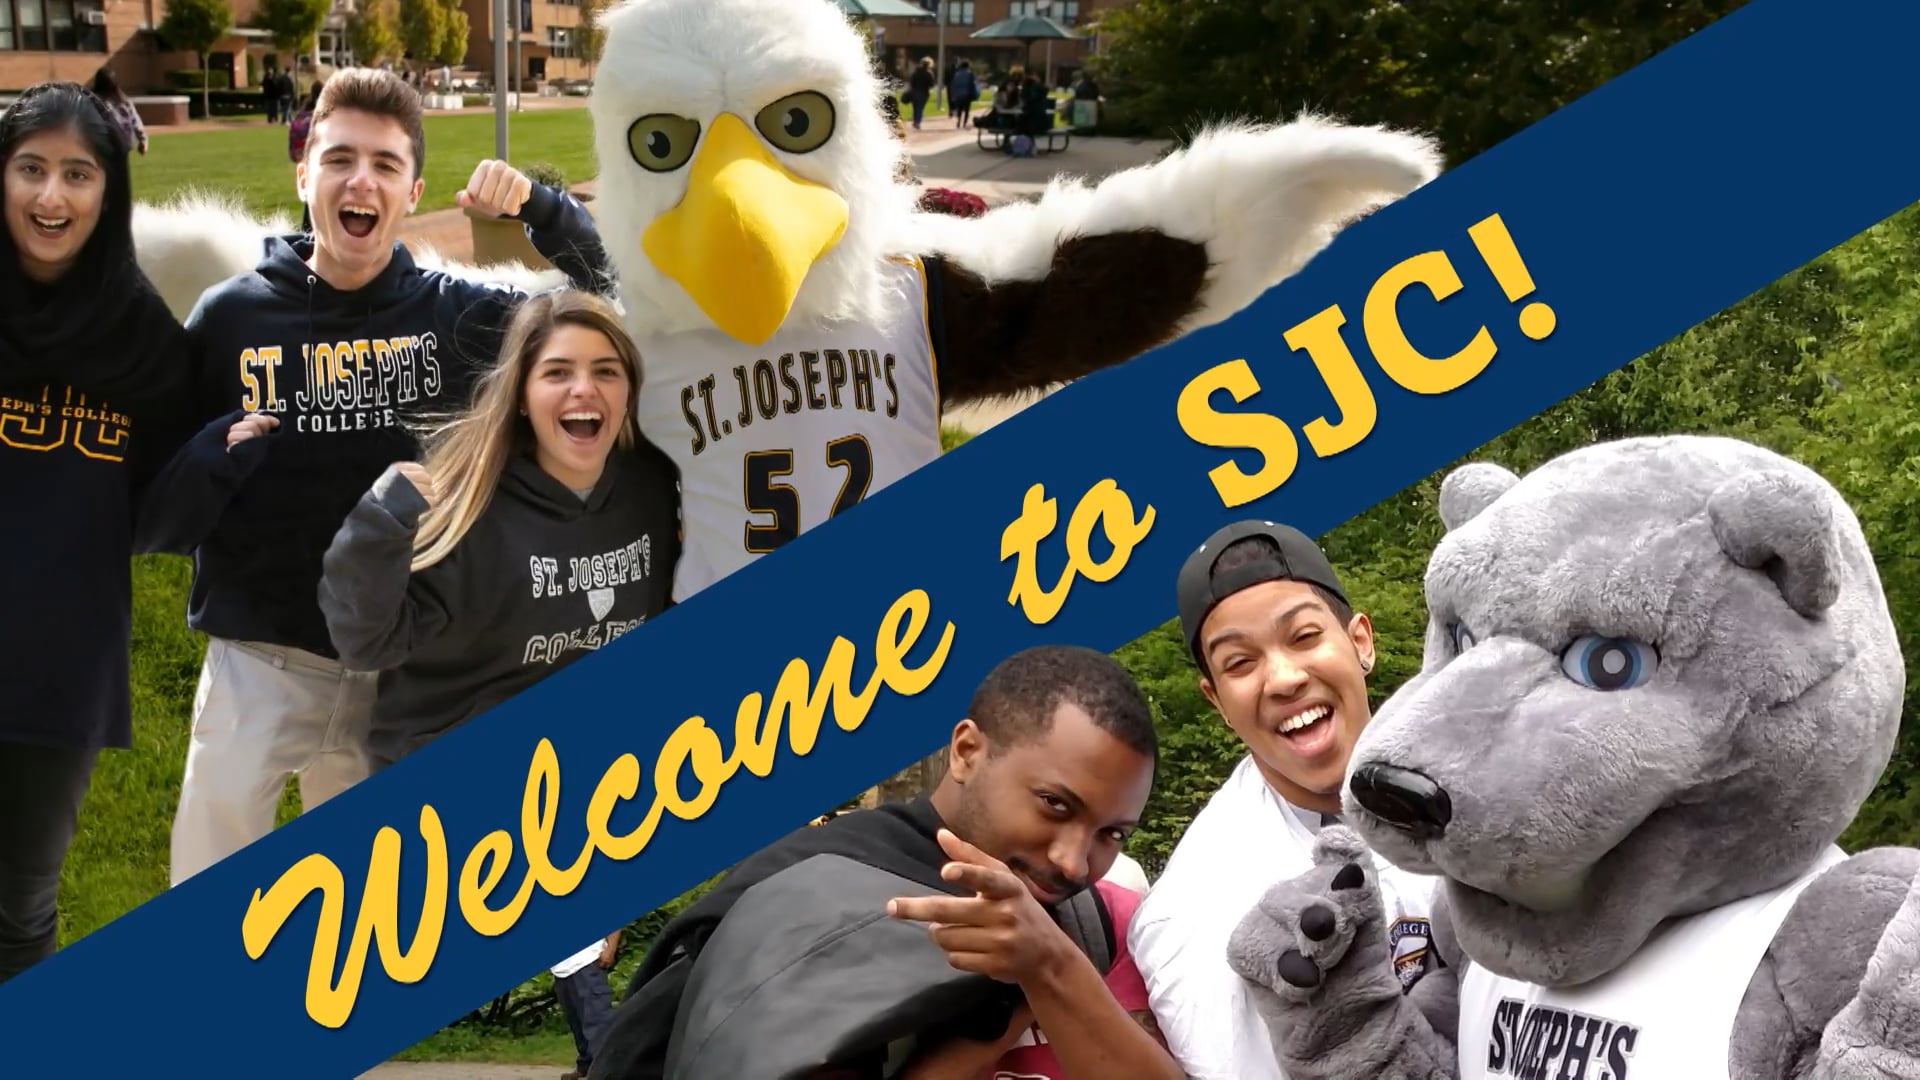 St. Joseph’s College: Living Our Mission - Return to Campus: Student Life and Athletics